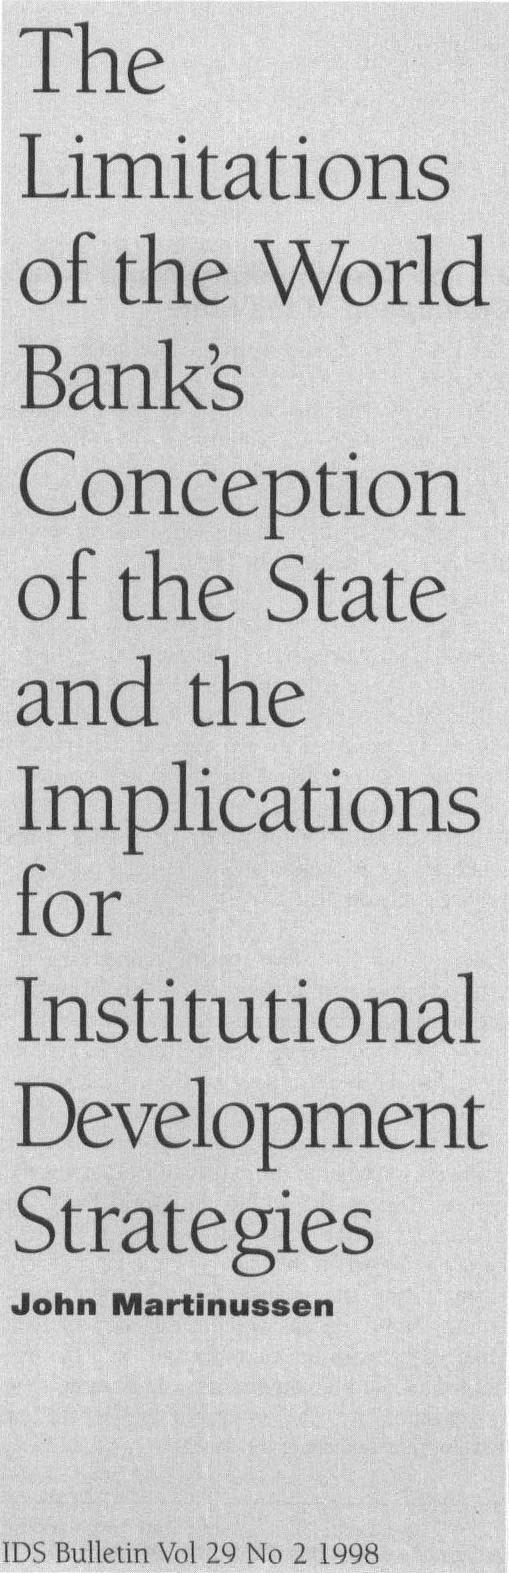 This article reflects on the conception of the state in WDR97; its limitations; and their implications for the recommendations of the Report about strategies for institutional development.